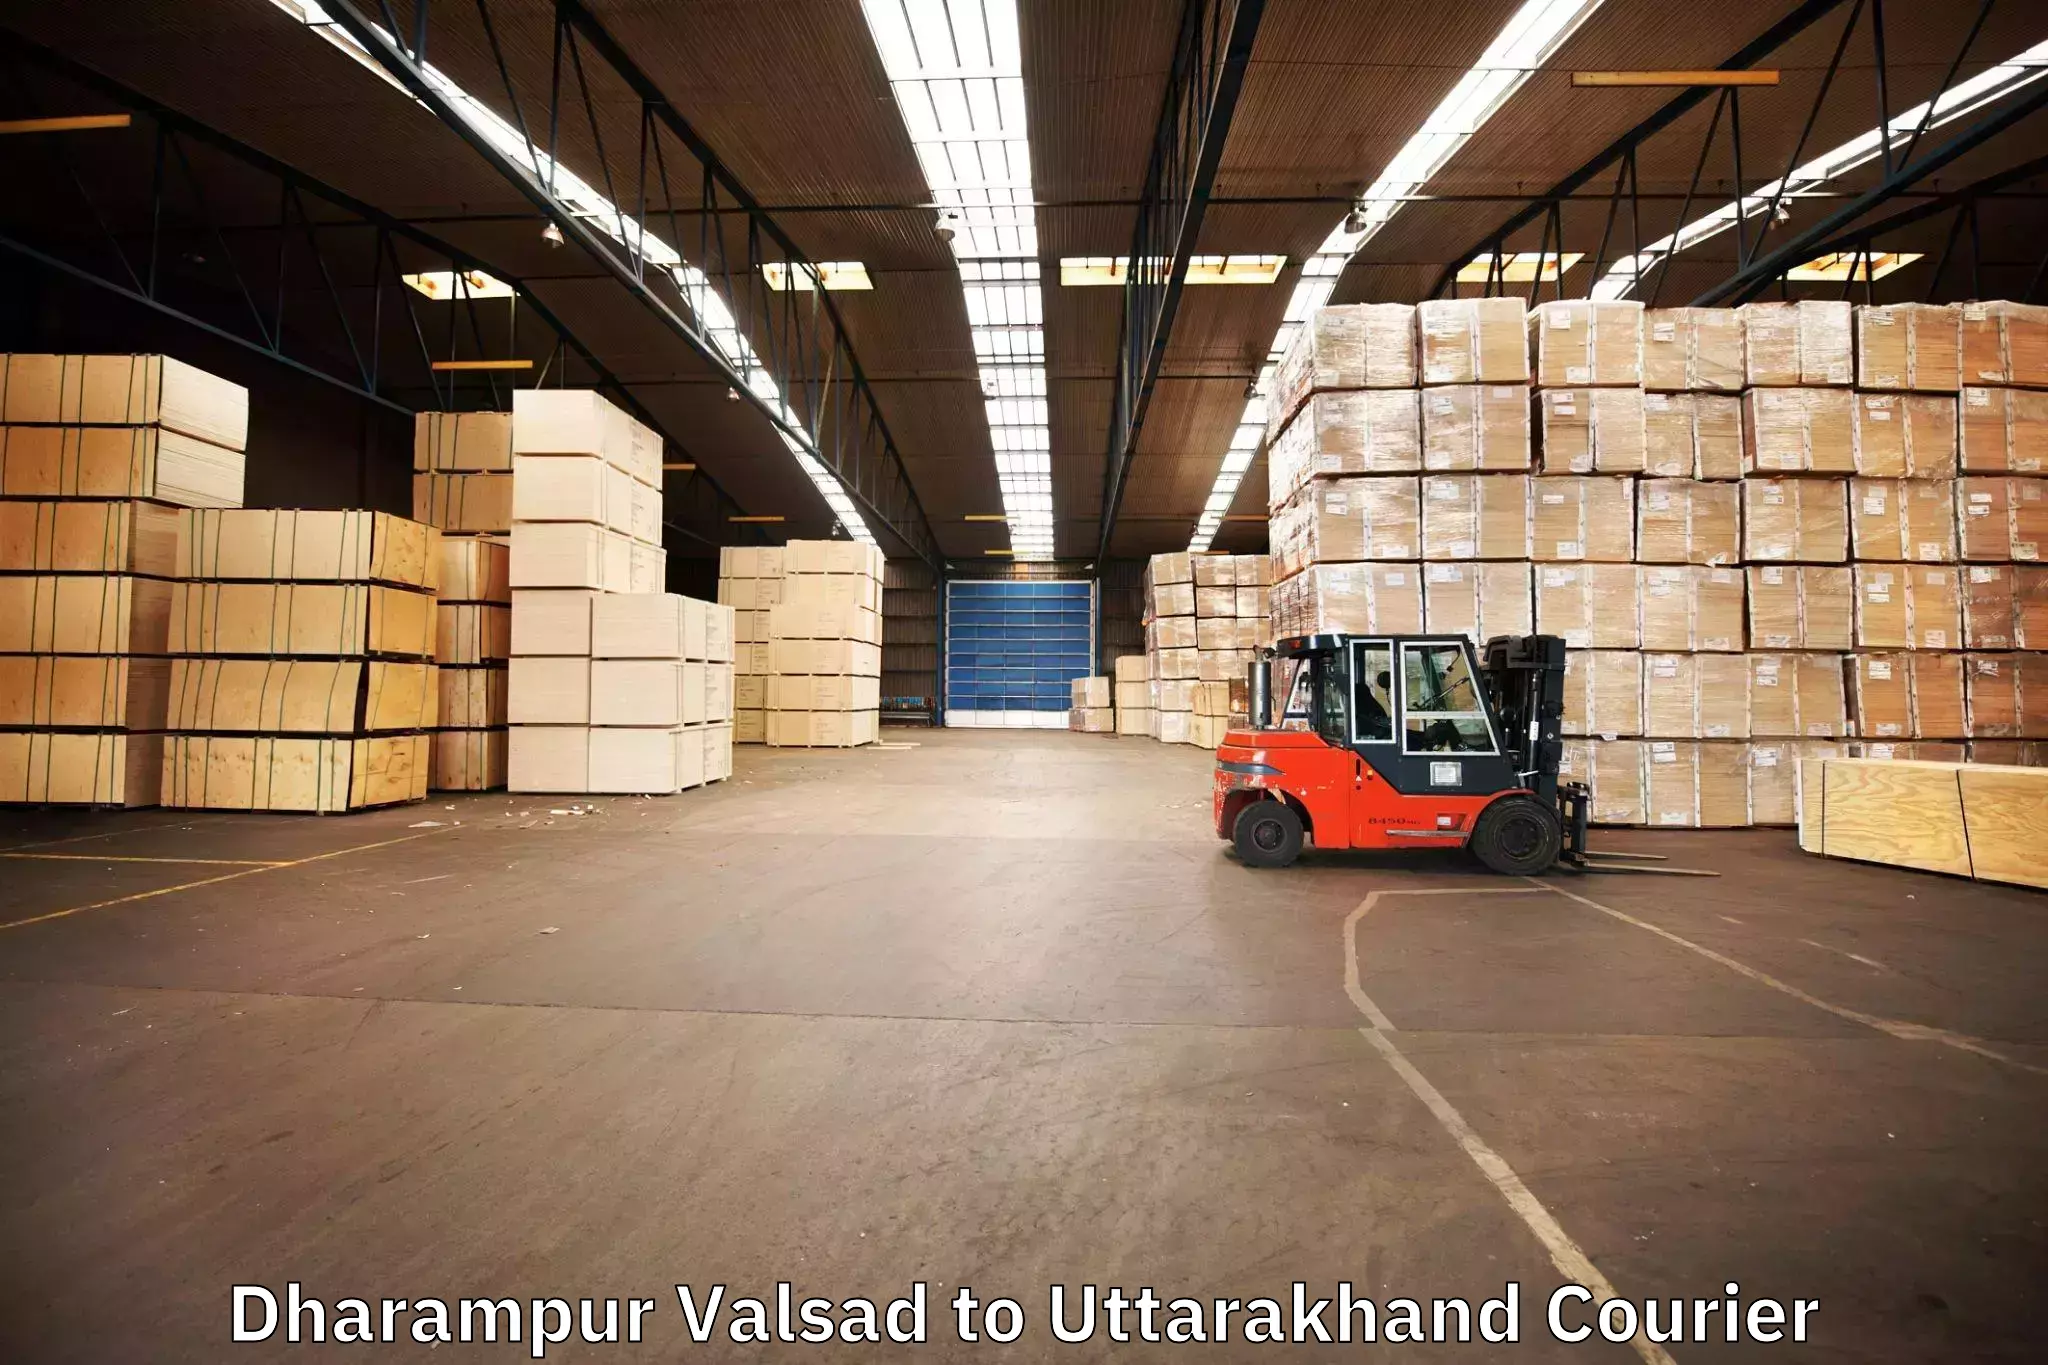 Furniture transport company Dharampur Valsad to Roorkee